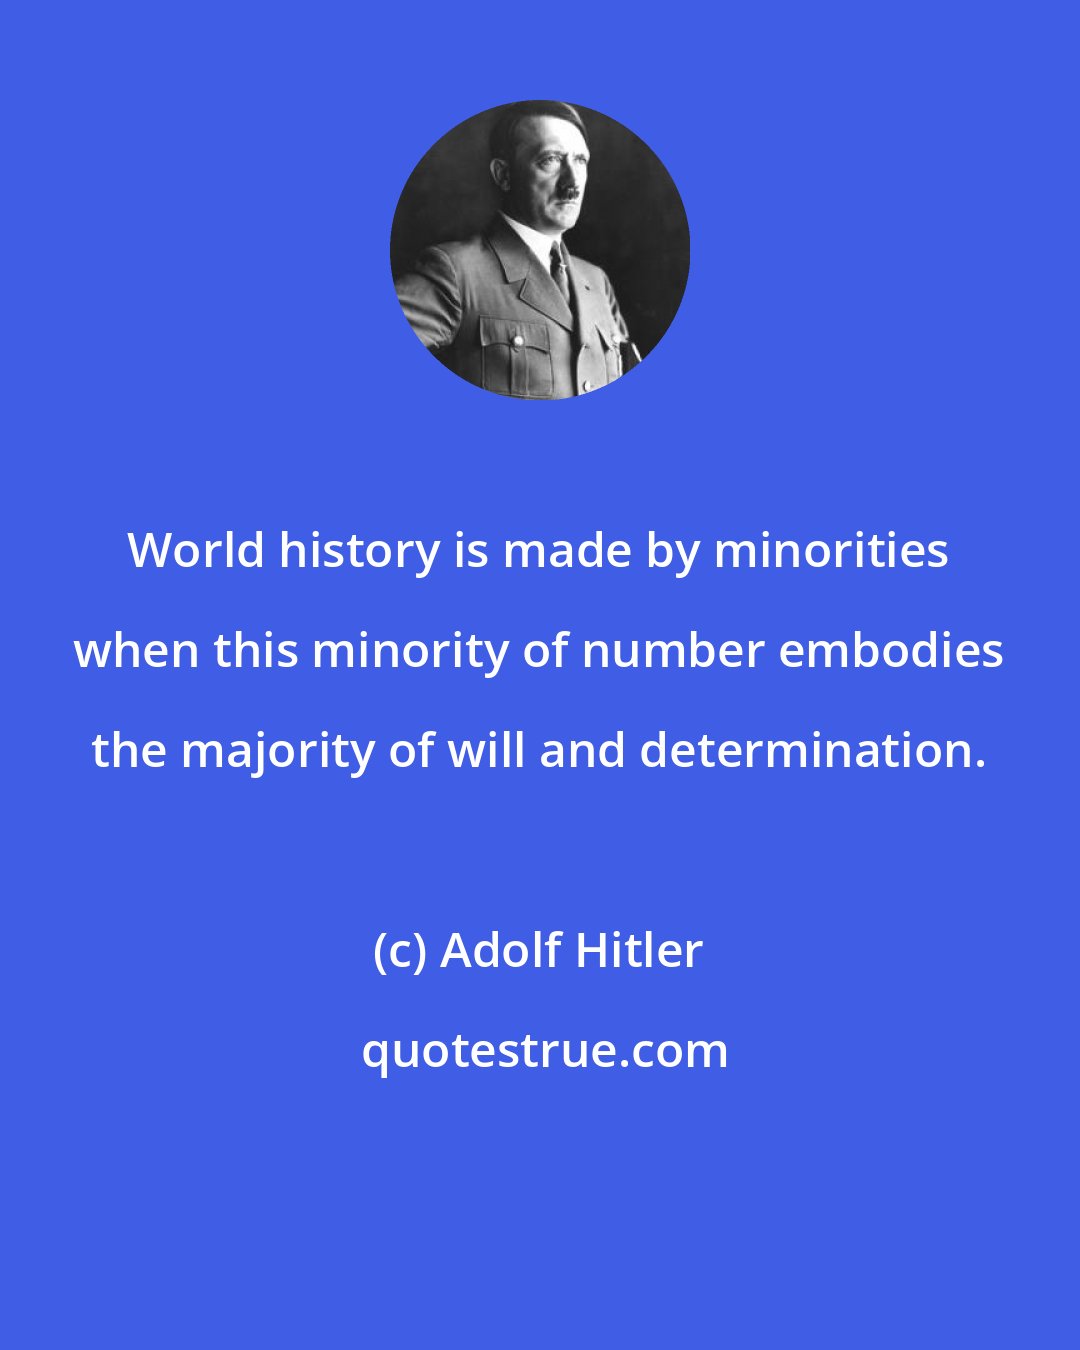 Adolf Hitler: World history is made by minorities when this minority of number embodies the majority of will and determination.